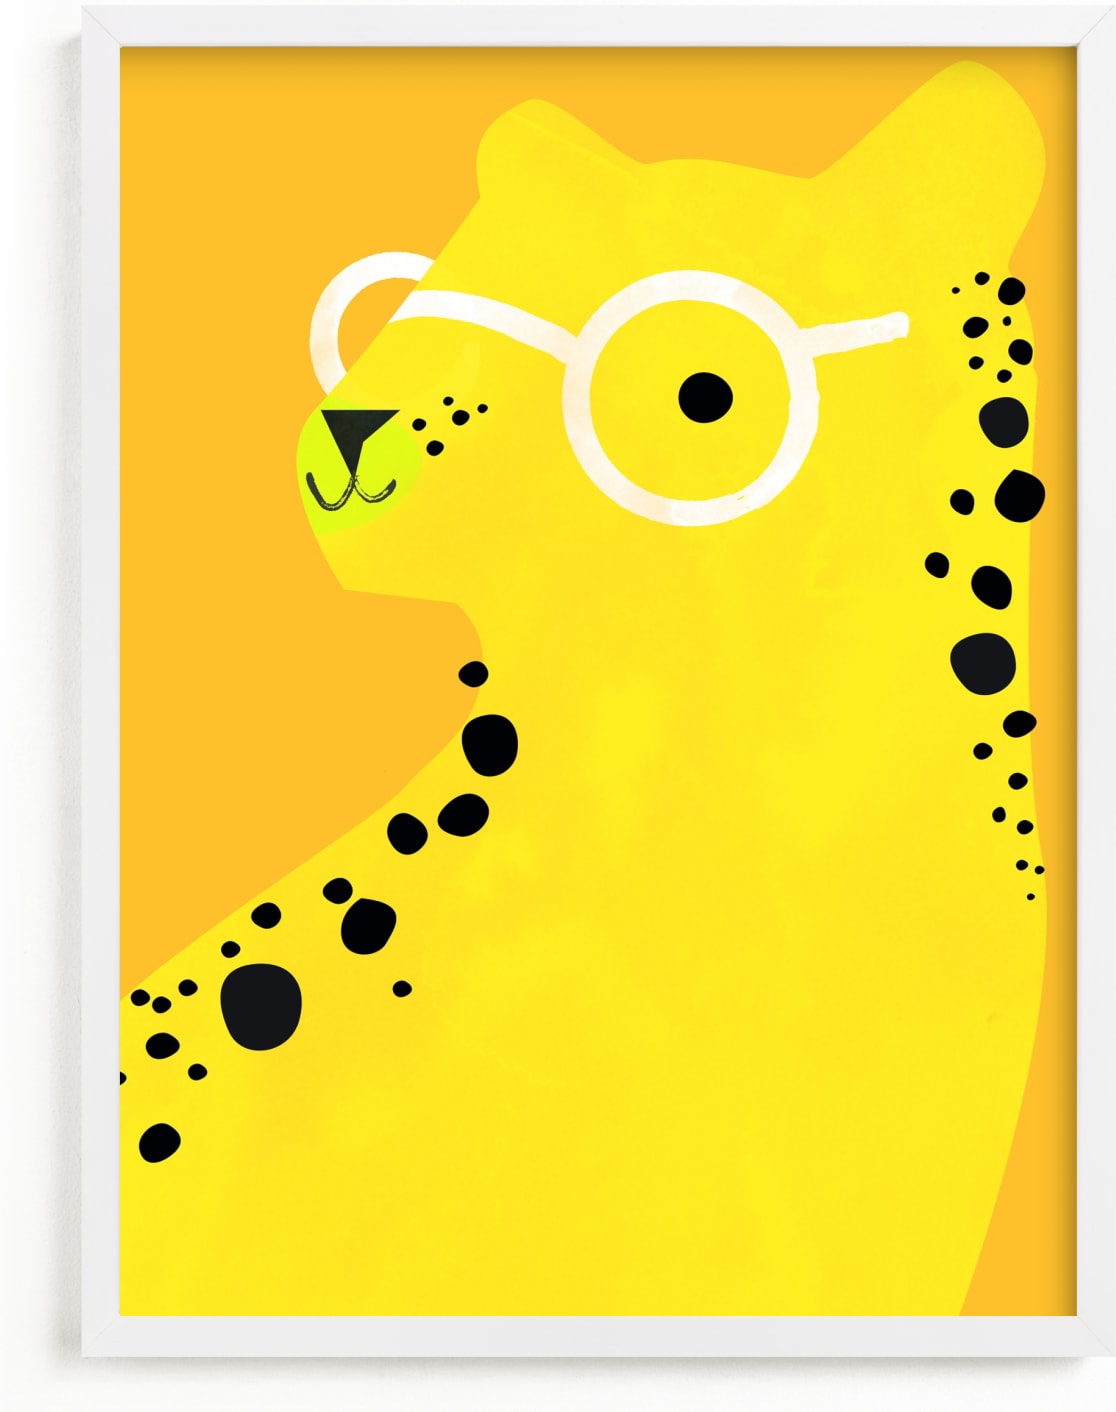 This is a yellow kids wall art by Lori Wemple called Cheetah.